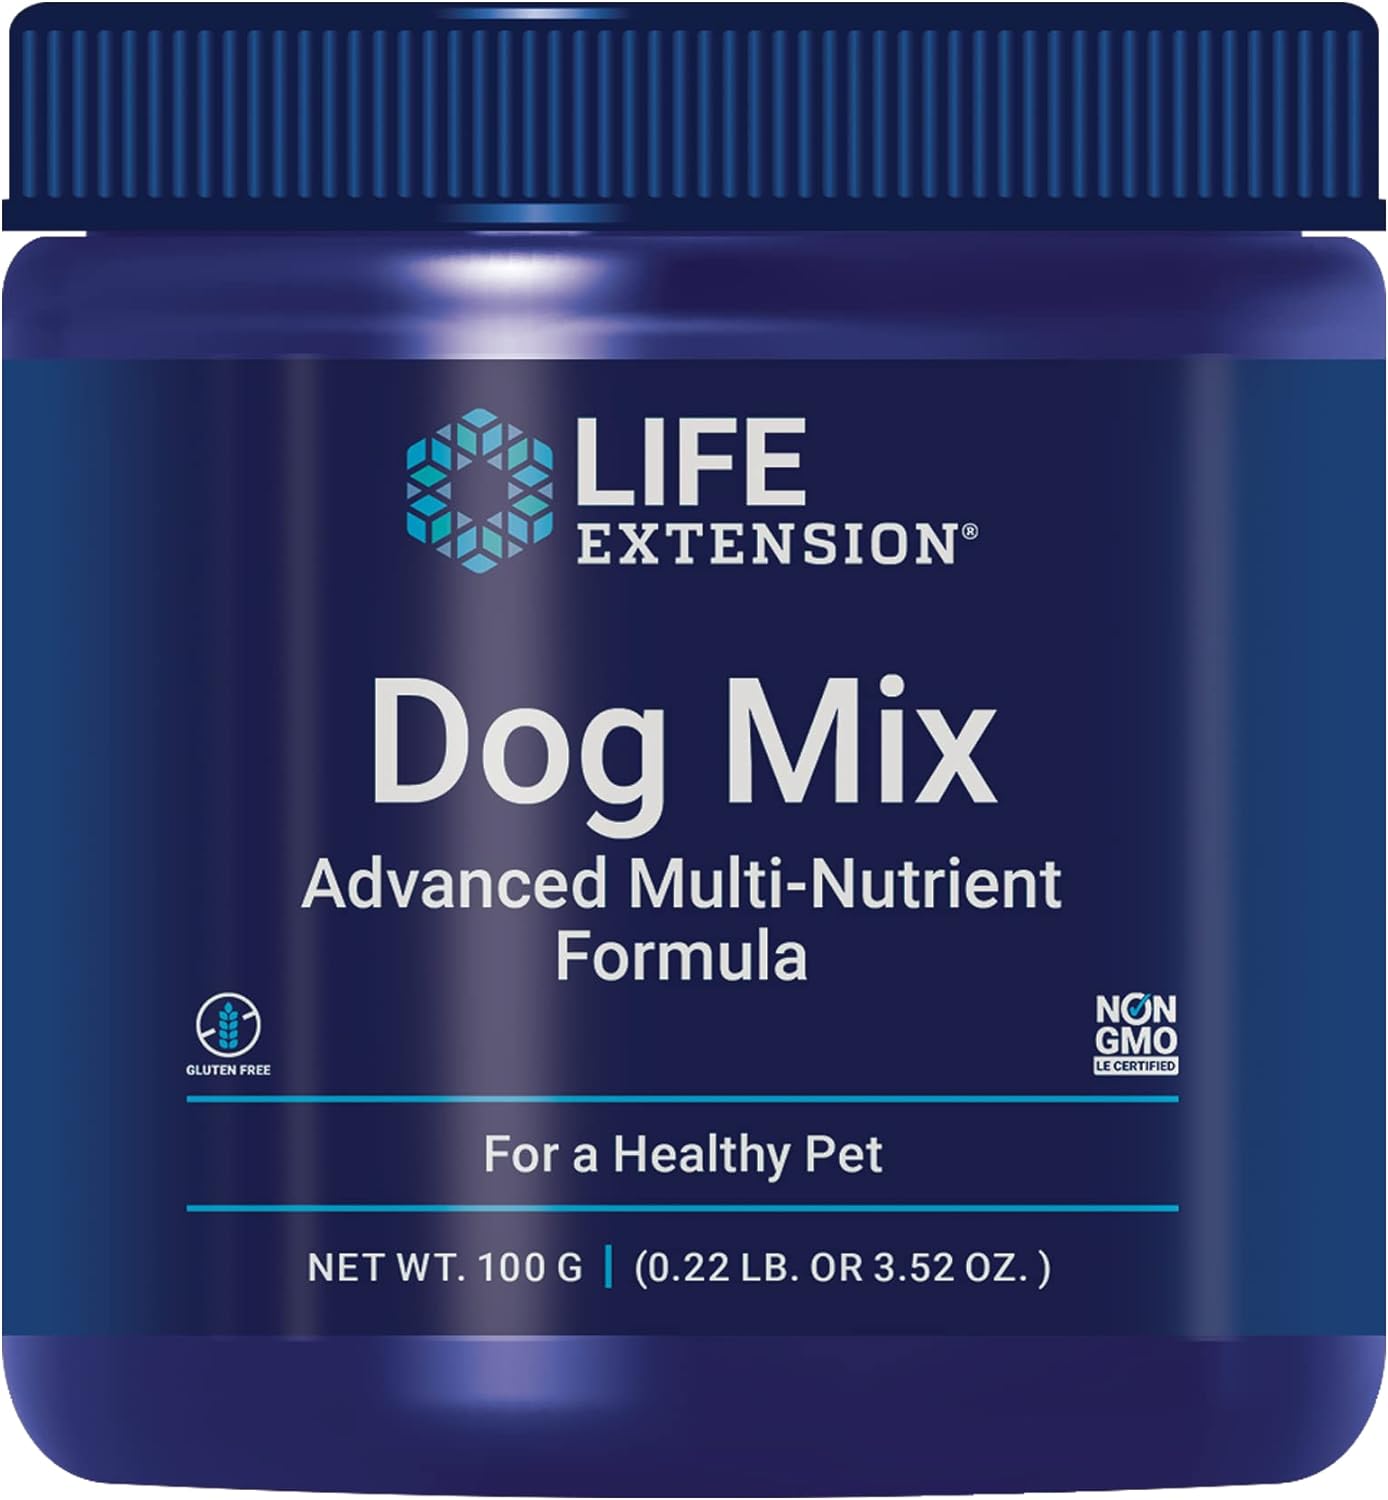 Life Extension Dog Mix - Daily Nutrition Care Supplement Powder for Your Canine Pet - Advanced Formula with Vitamins, Probiotics & Essential Fatty Acids - Gluten-Free, Non-GMO – 100 g, 60 Servings